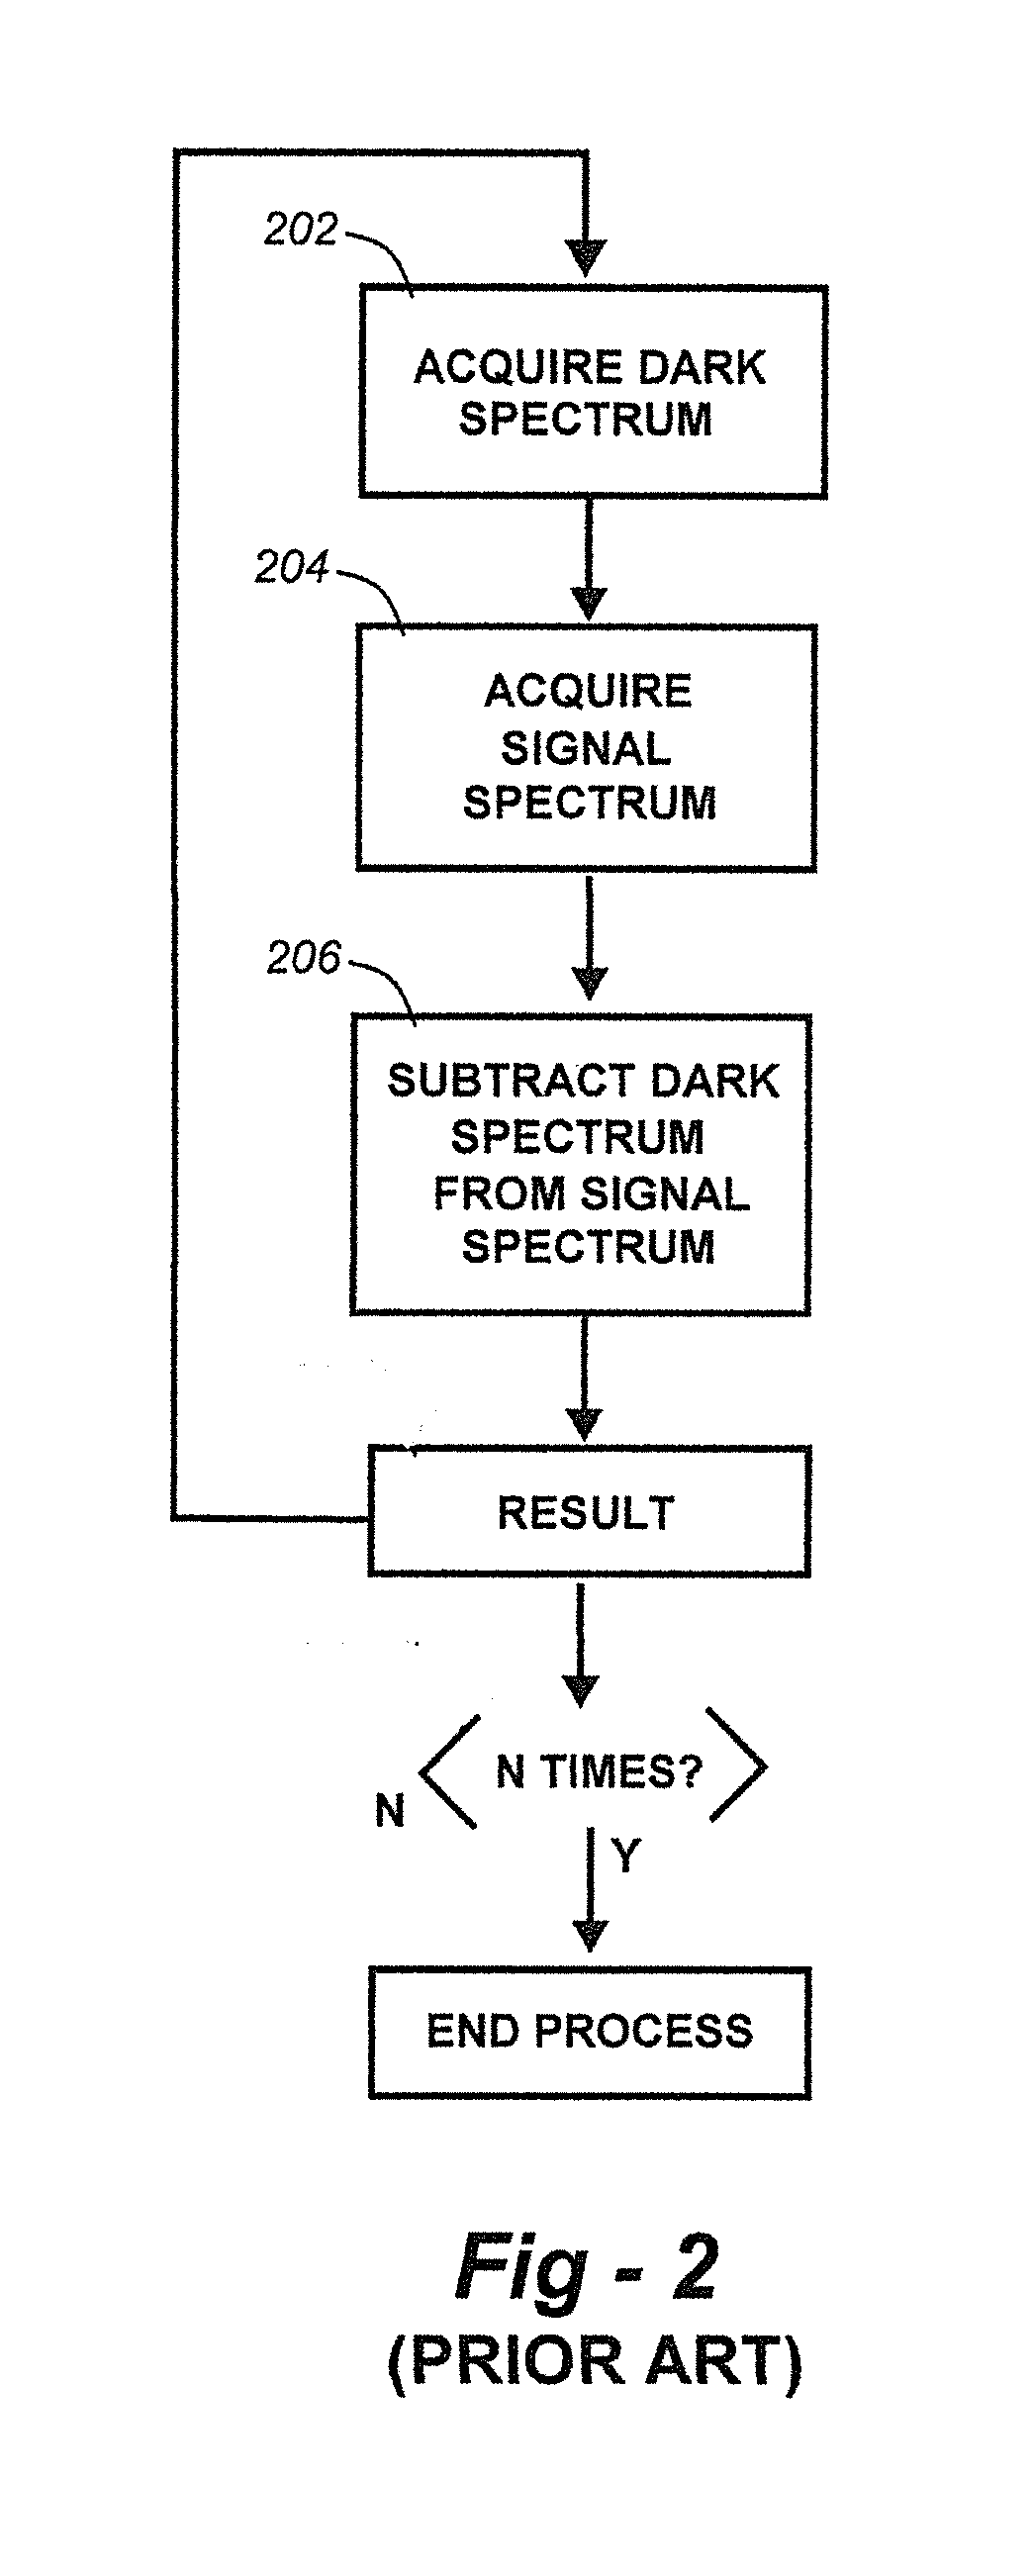 Methods for collection, dark correction, and reporting of spectra from array detector spectrometers